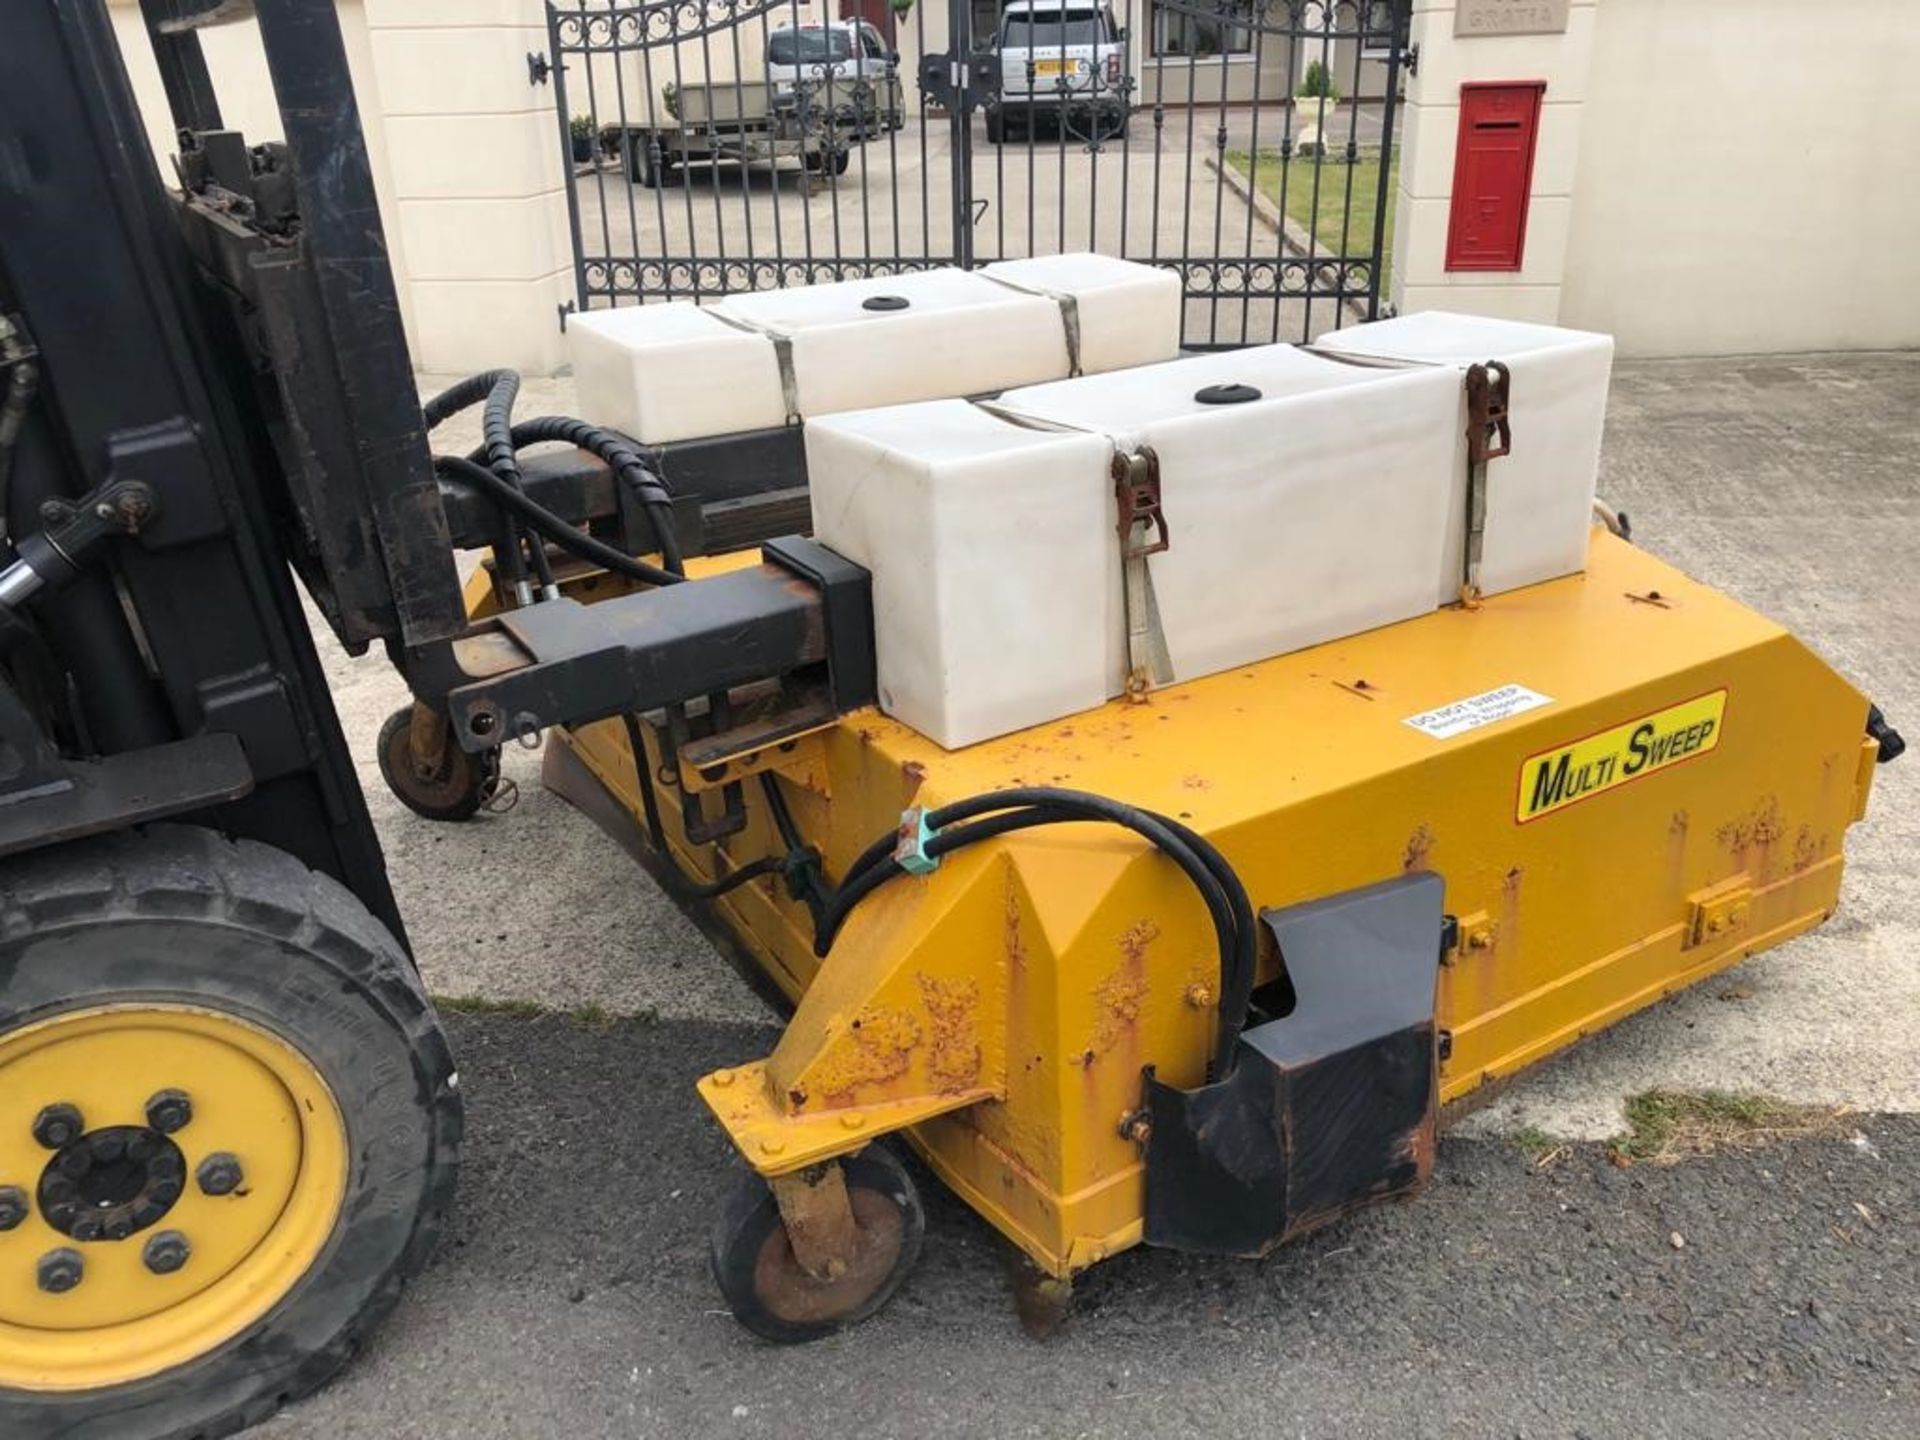 1 x MultiSweep Hydraulic Sweeper / Collector - CL505 - Location: Northern Ireland - UK-Wide Delivery - Image 2 of 8